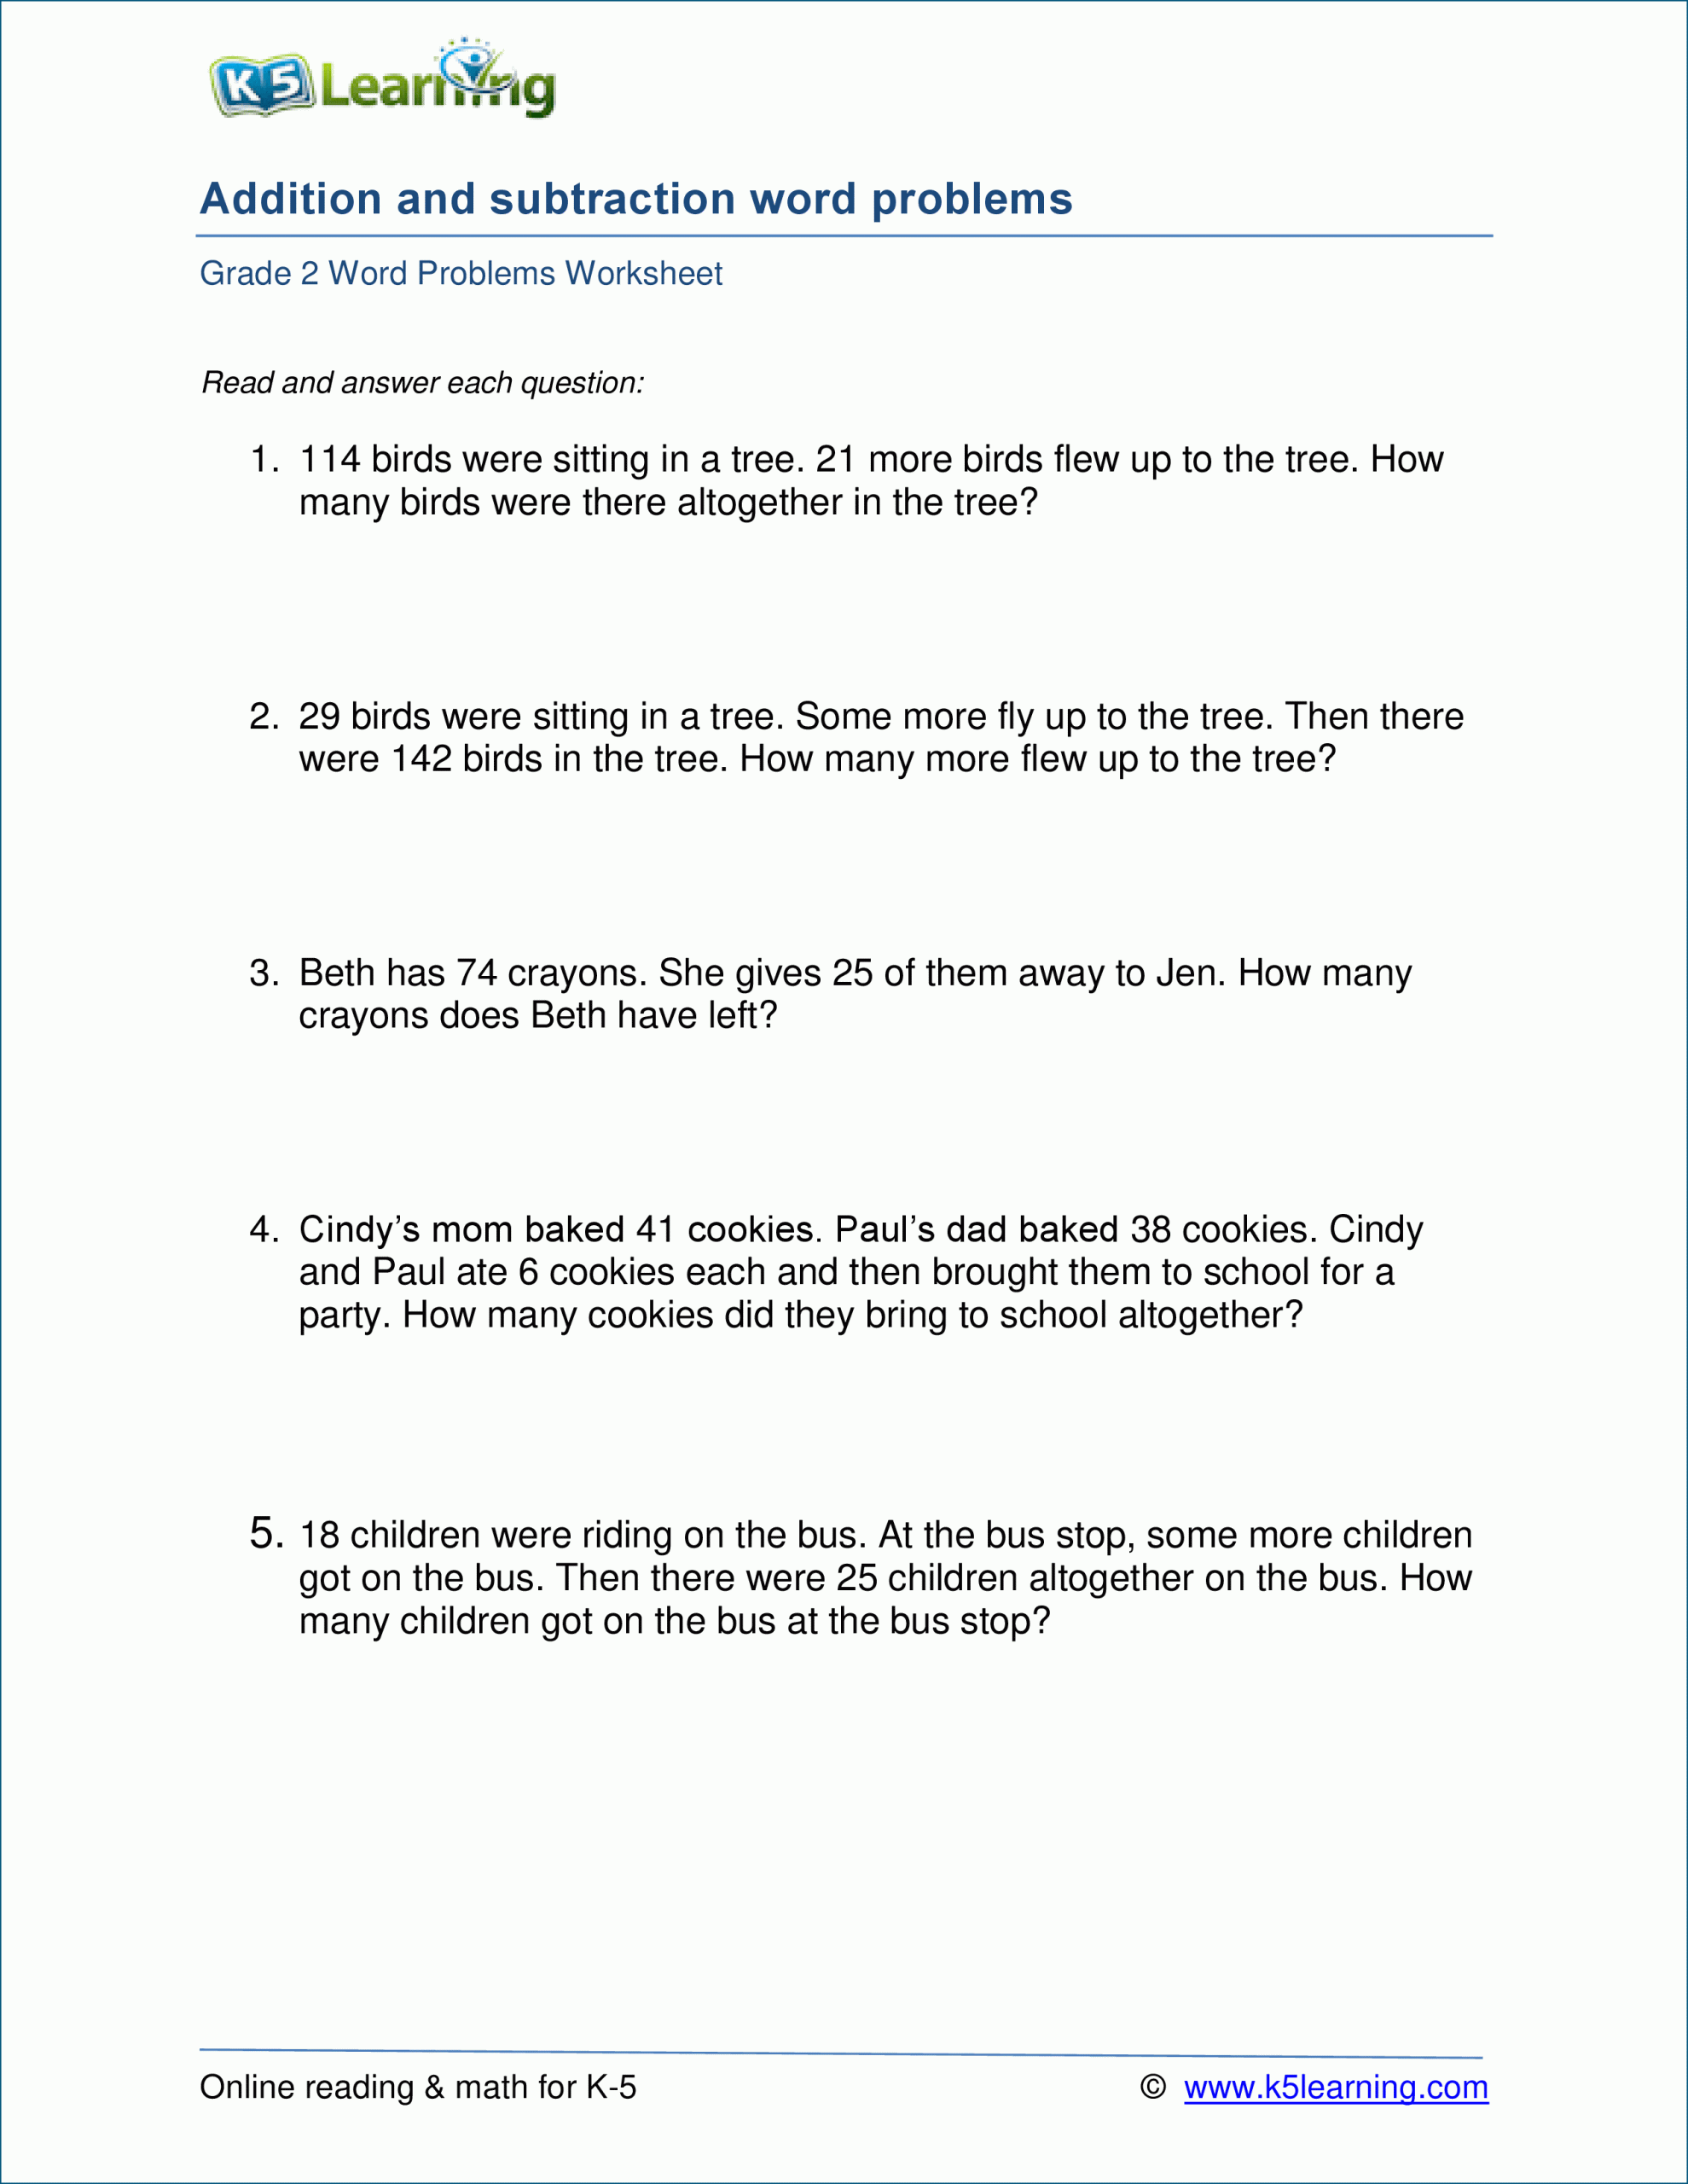 Addition Word Problems For Grade 2 Worksheets